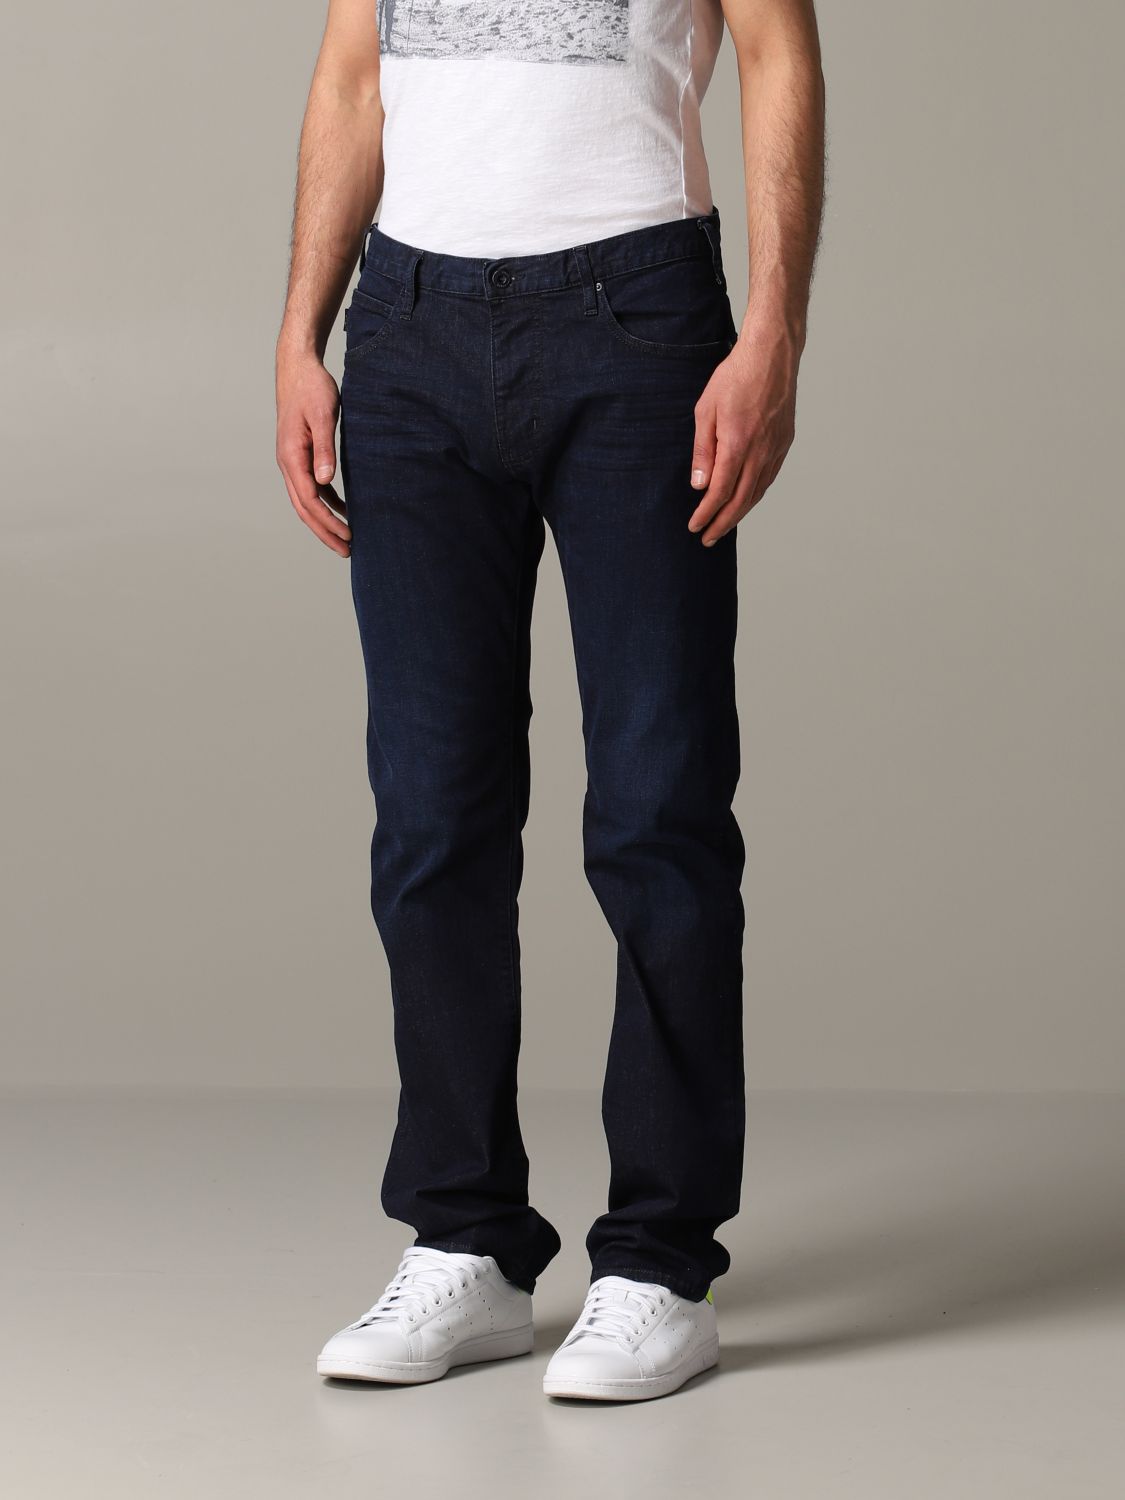 Emporio Armani Outlet: regular fit 9.5 oz jeans - | Emporio Armani jeans 8N1J45 1D19Z online at GIGLIO.COM